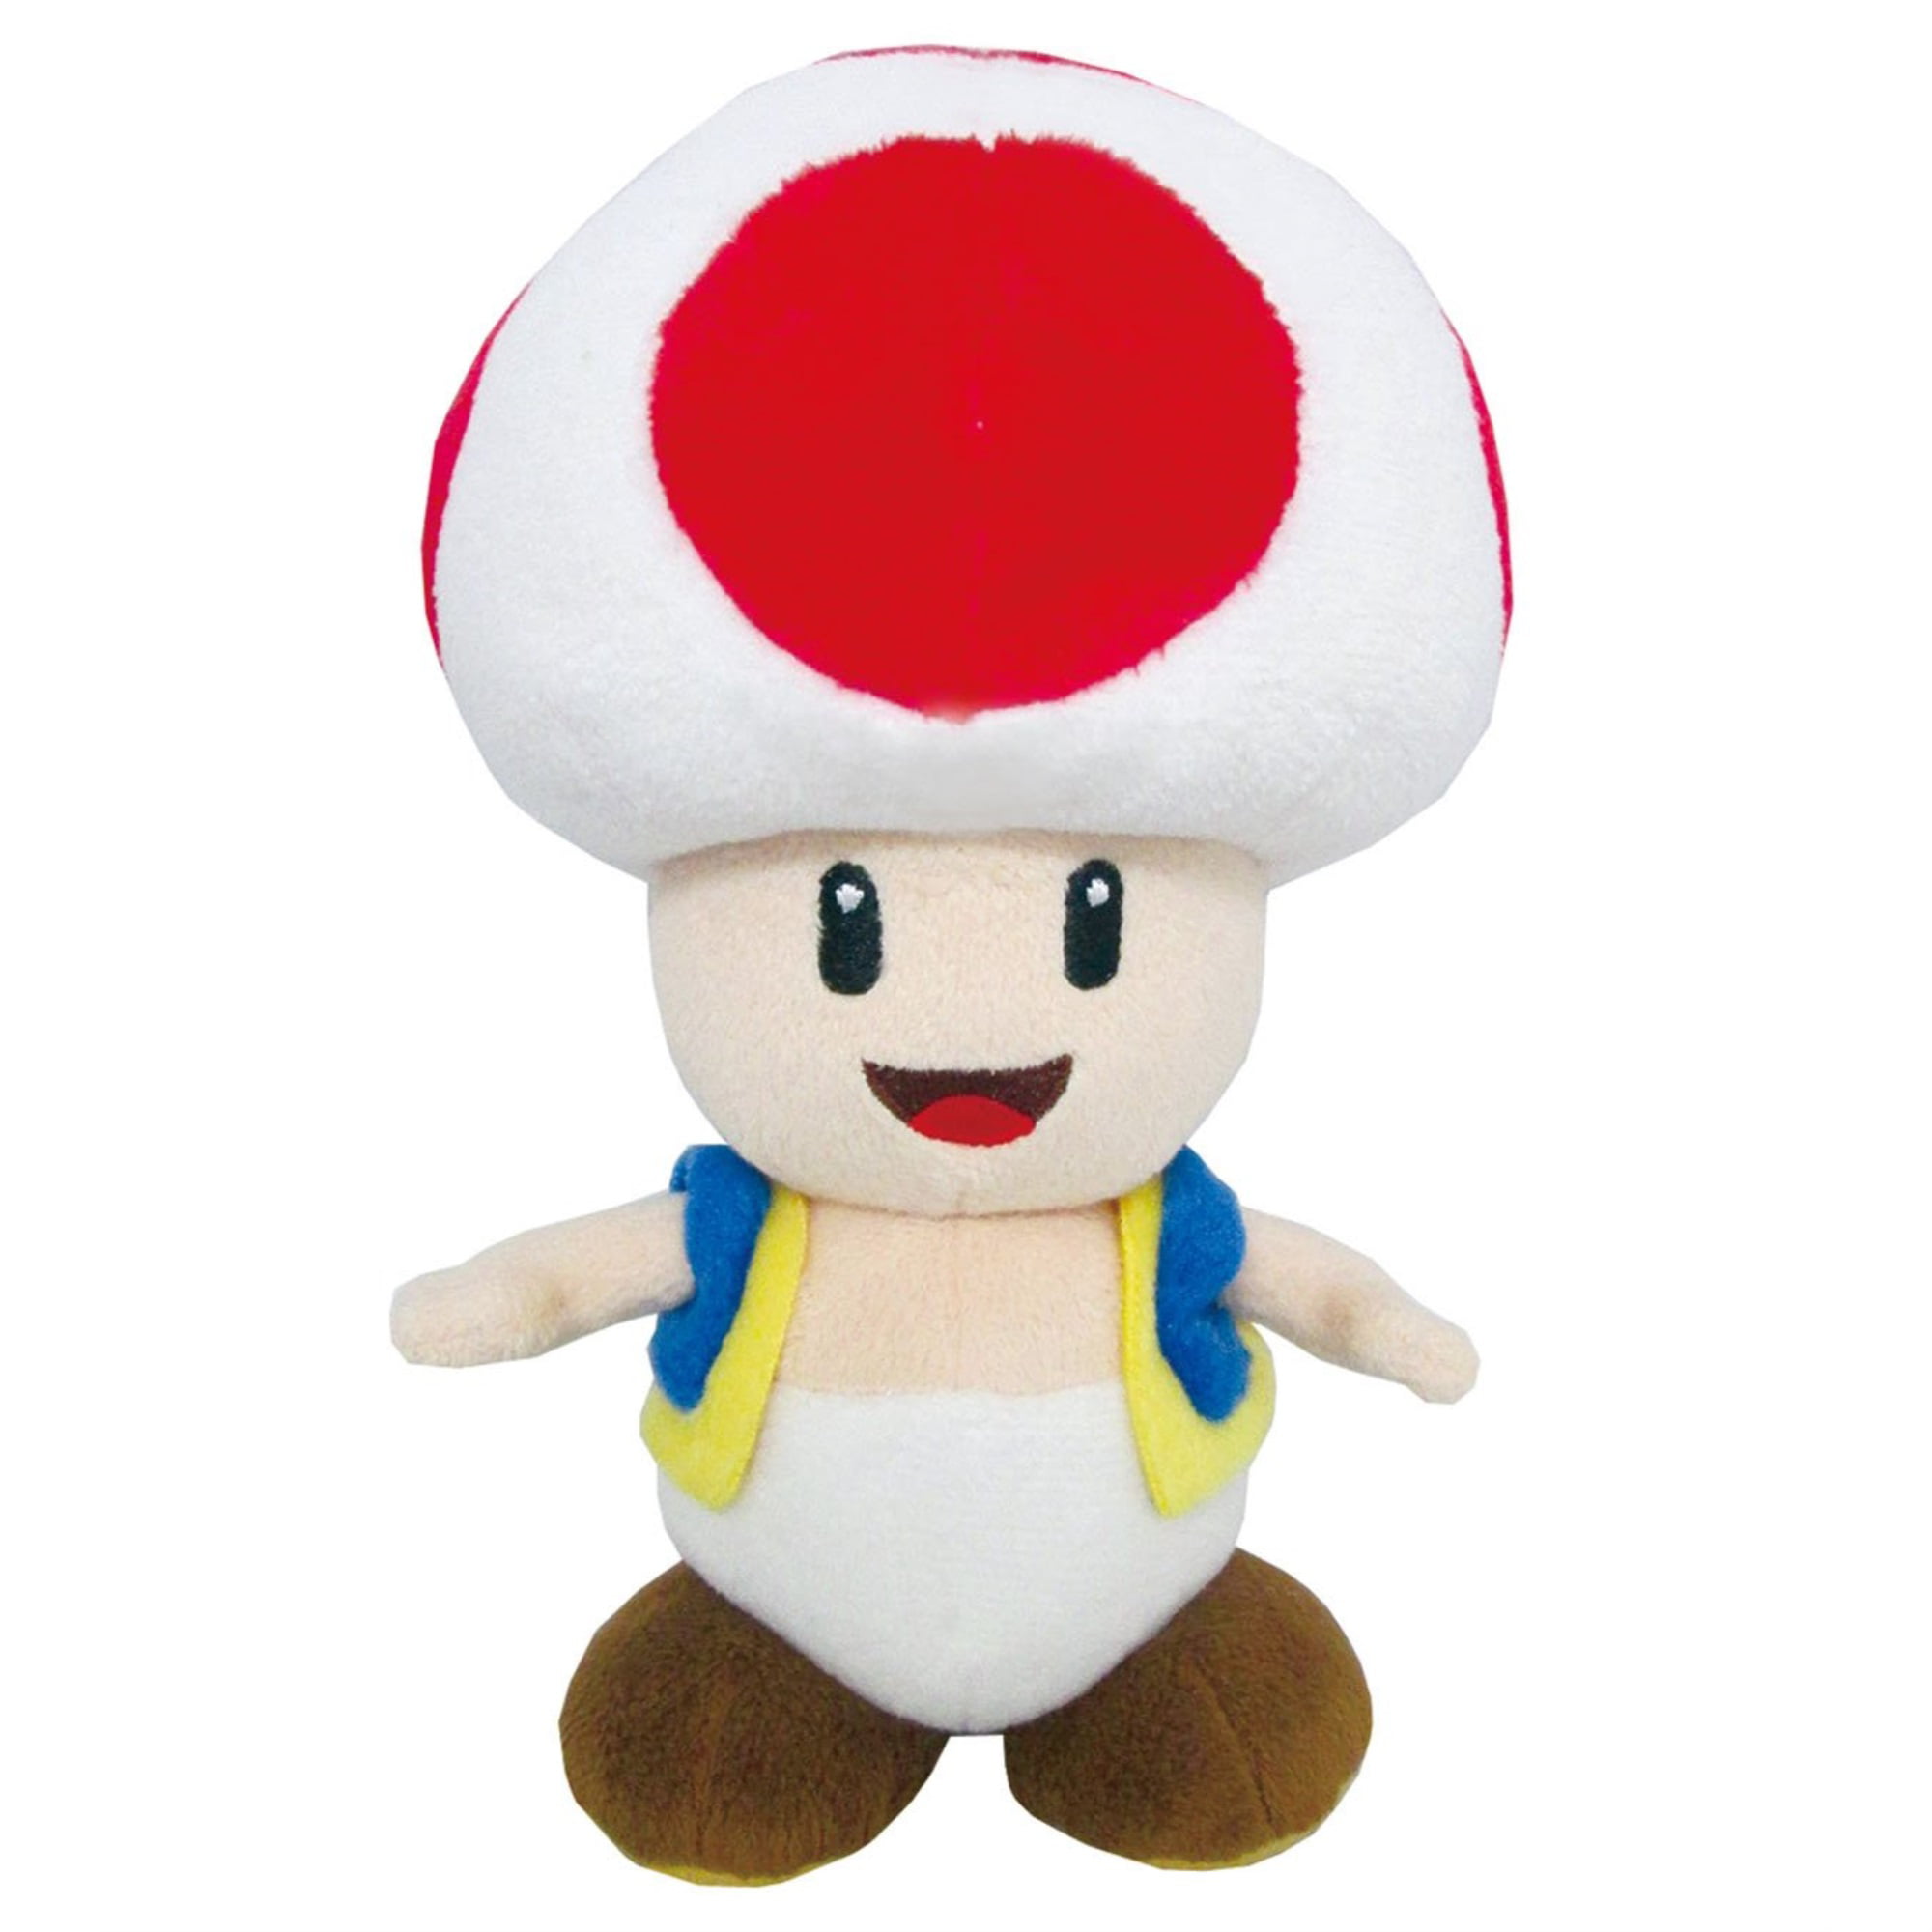 Blue Plush Toy Doll Gift Stuffed Animal 7" Details about   Super Mario Bros Mushroom Toad Red 